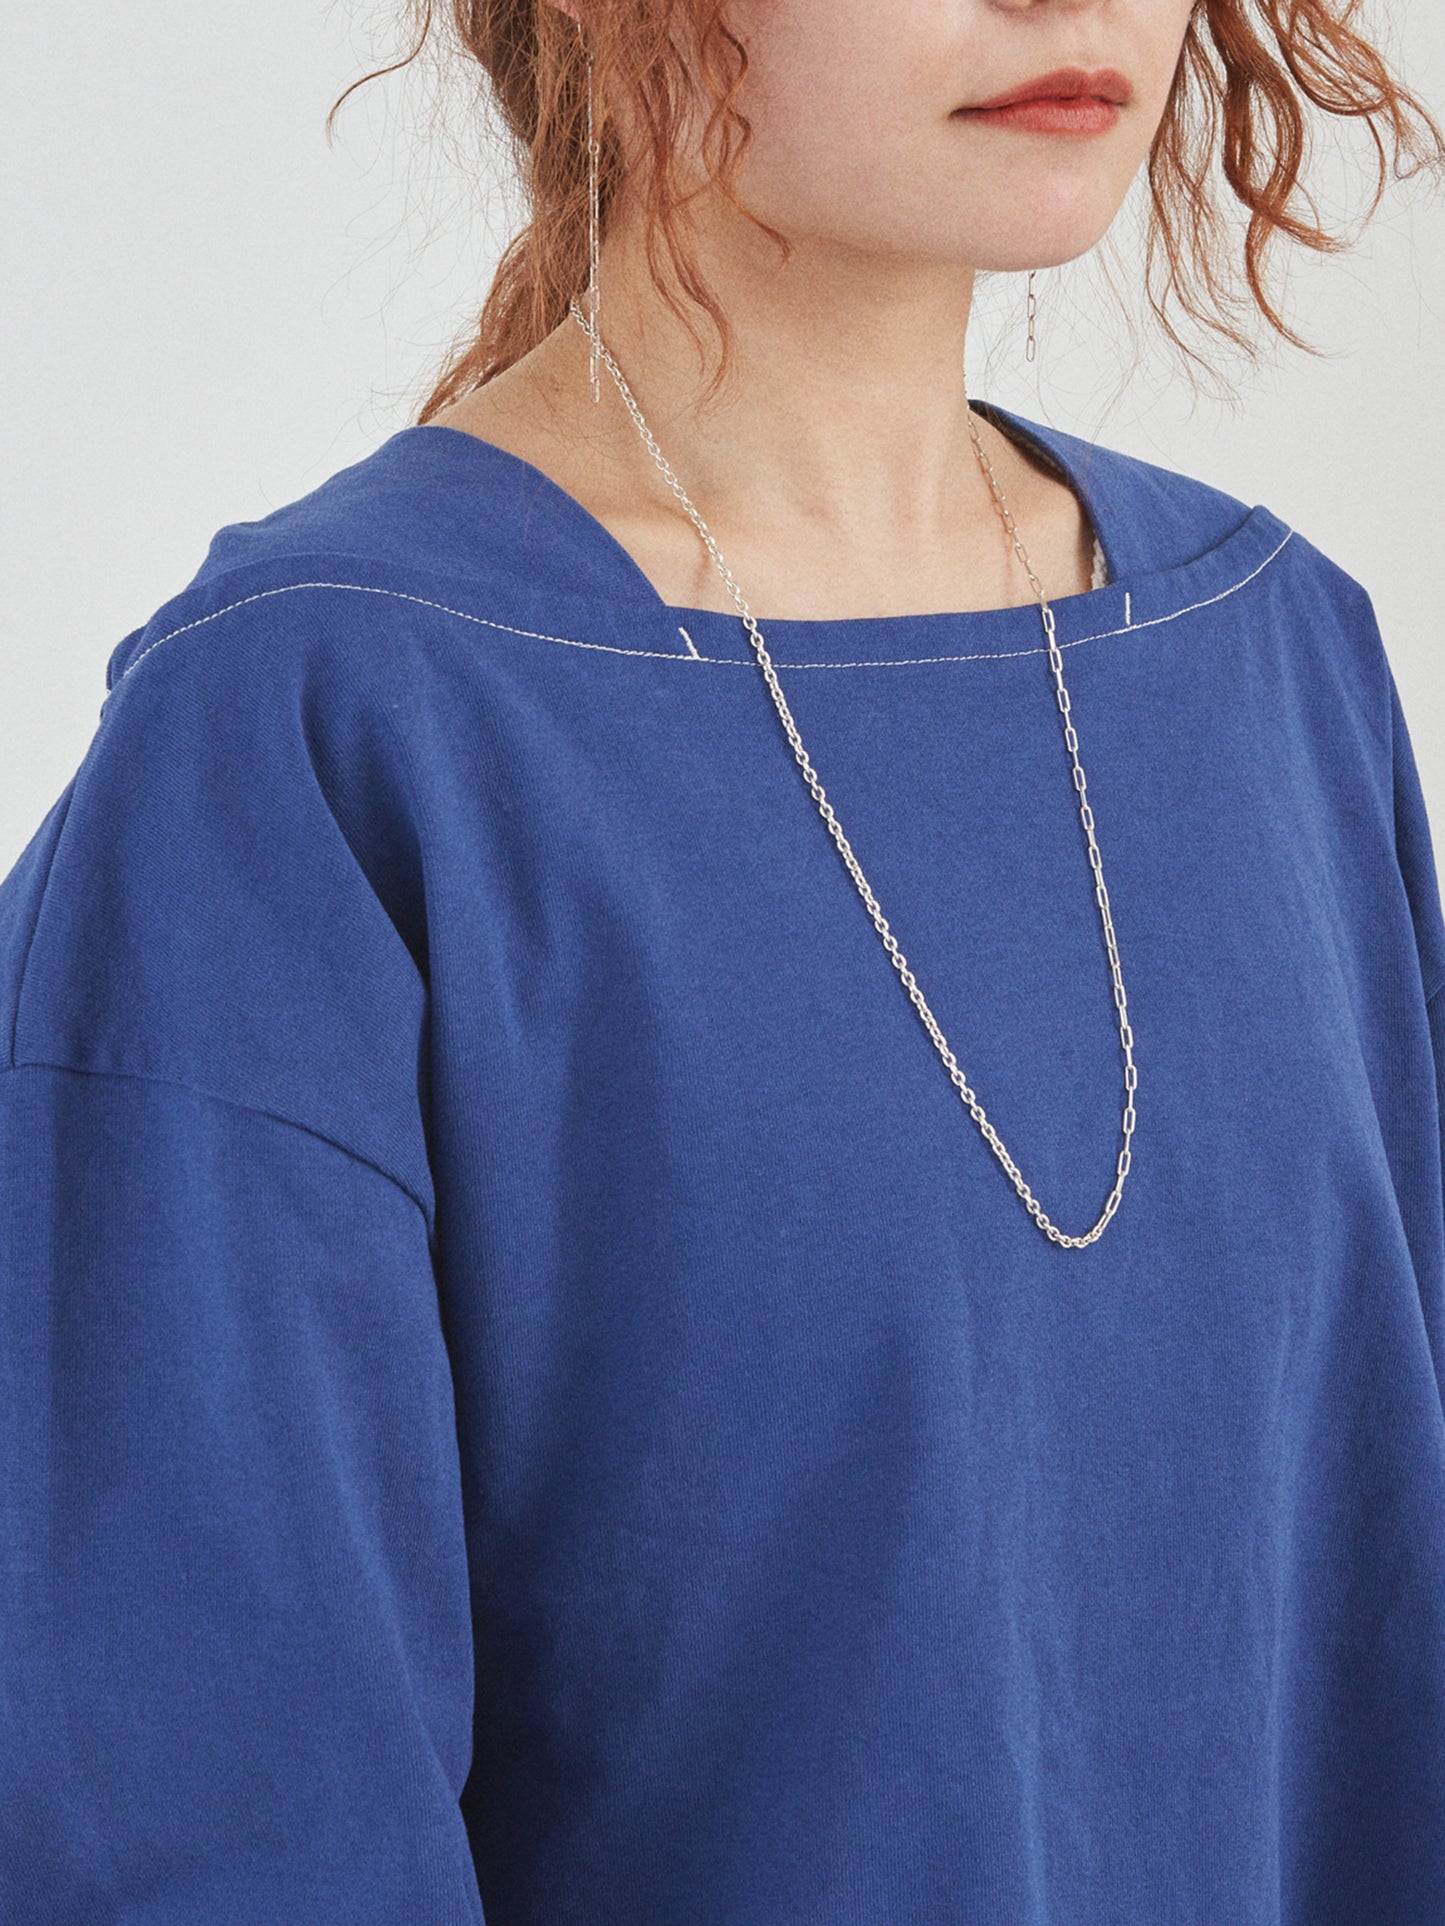 BAGGY BOAT L/S TEE COTTON JERSEY AM-C0205 Blue